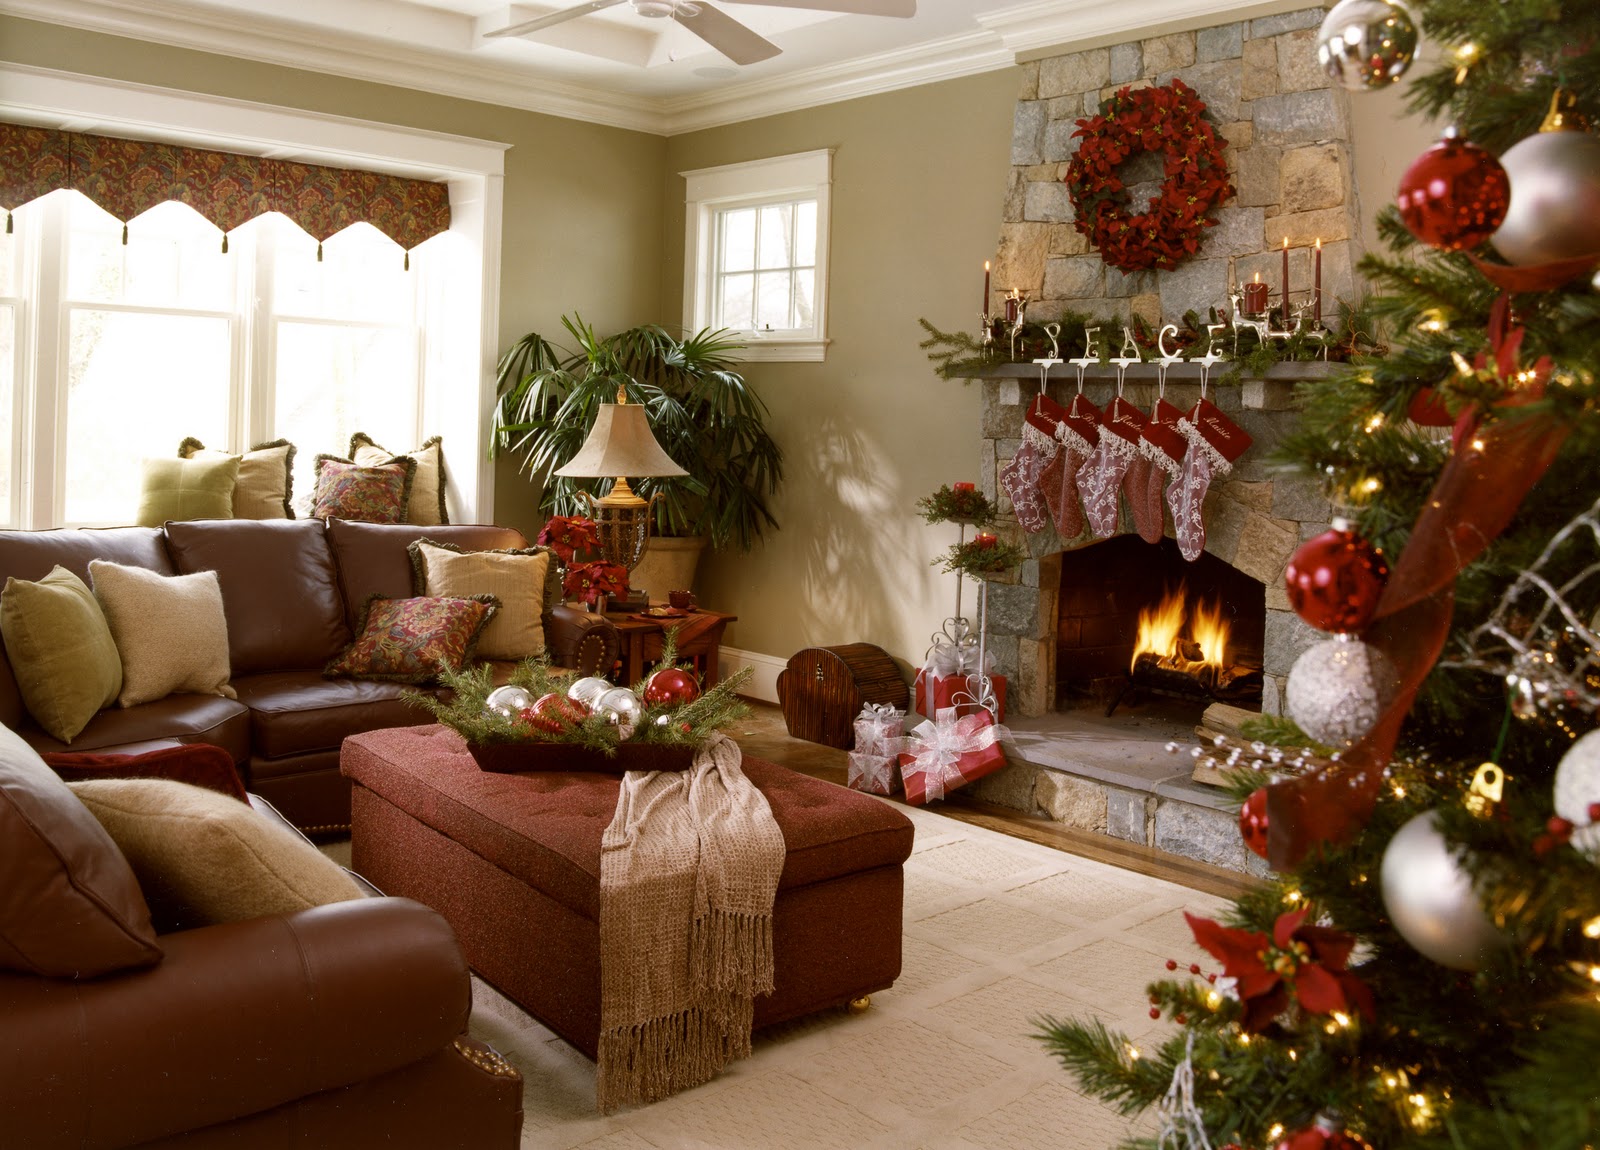 10 Christmas Decorating Ideas For Small Spaces